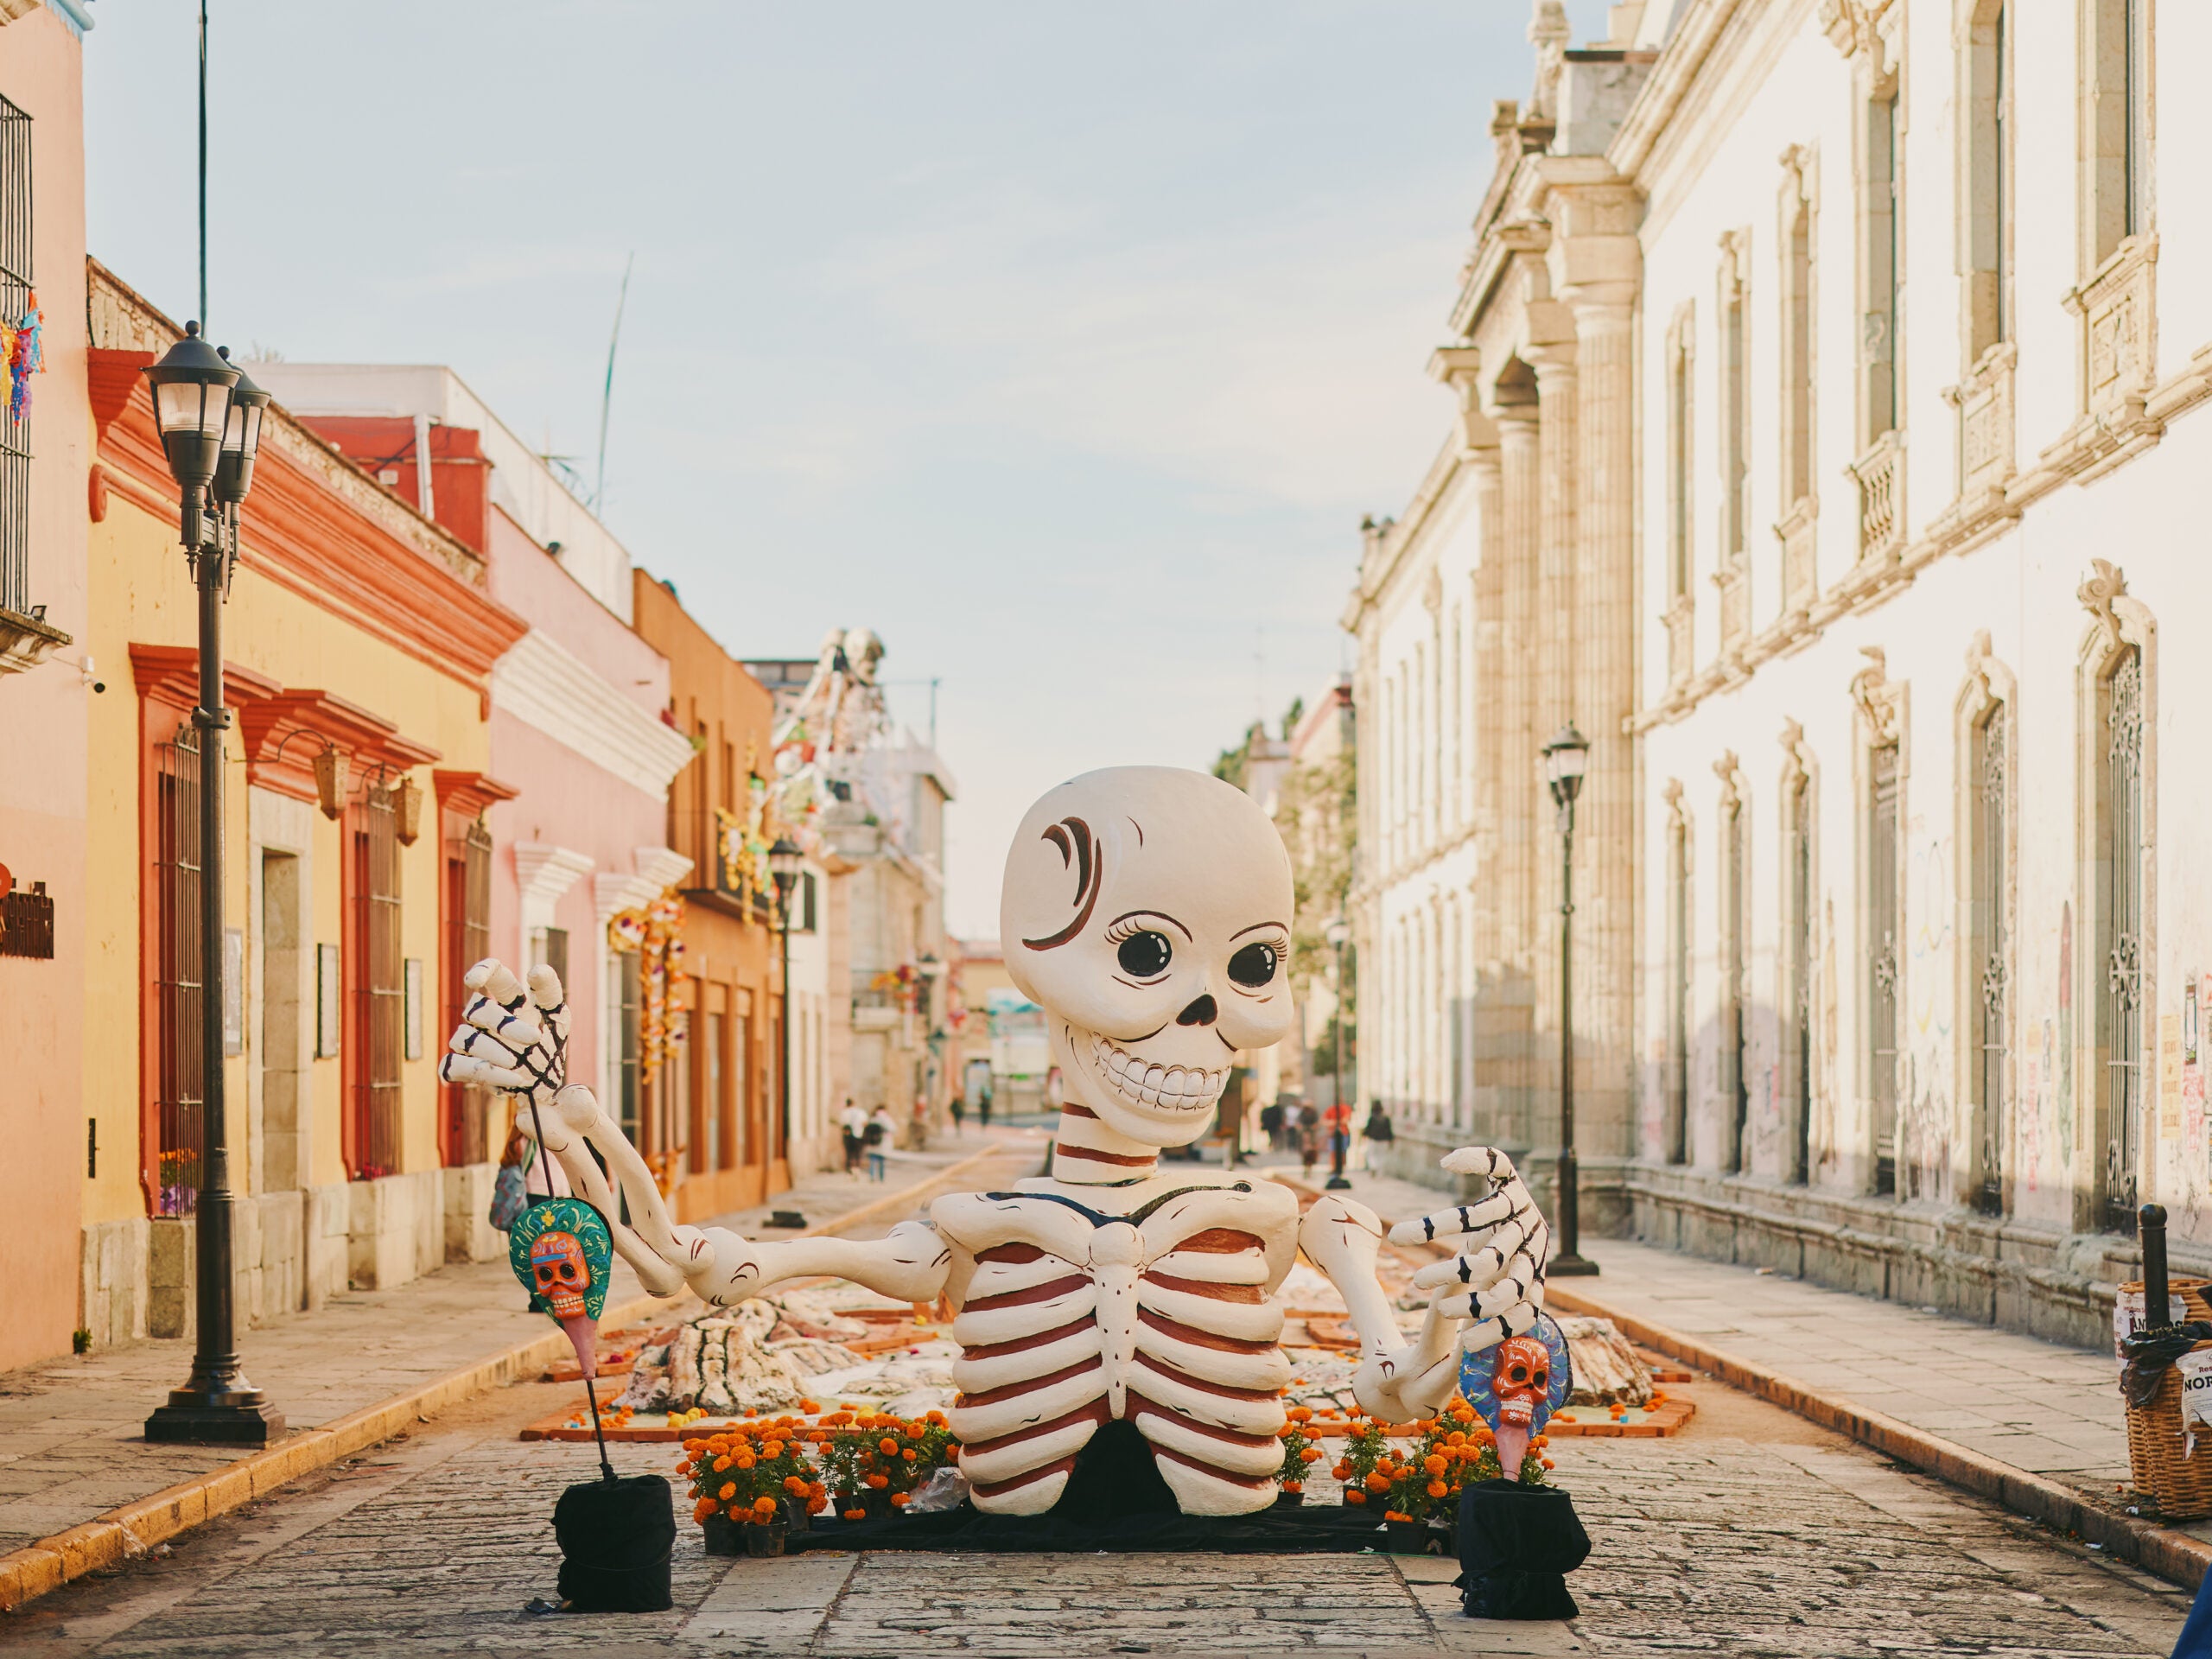 Giant skeleton popping out of cobblestone street for Day of the Dead in Oaxaca, Mexico.